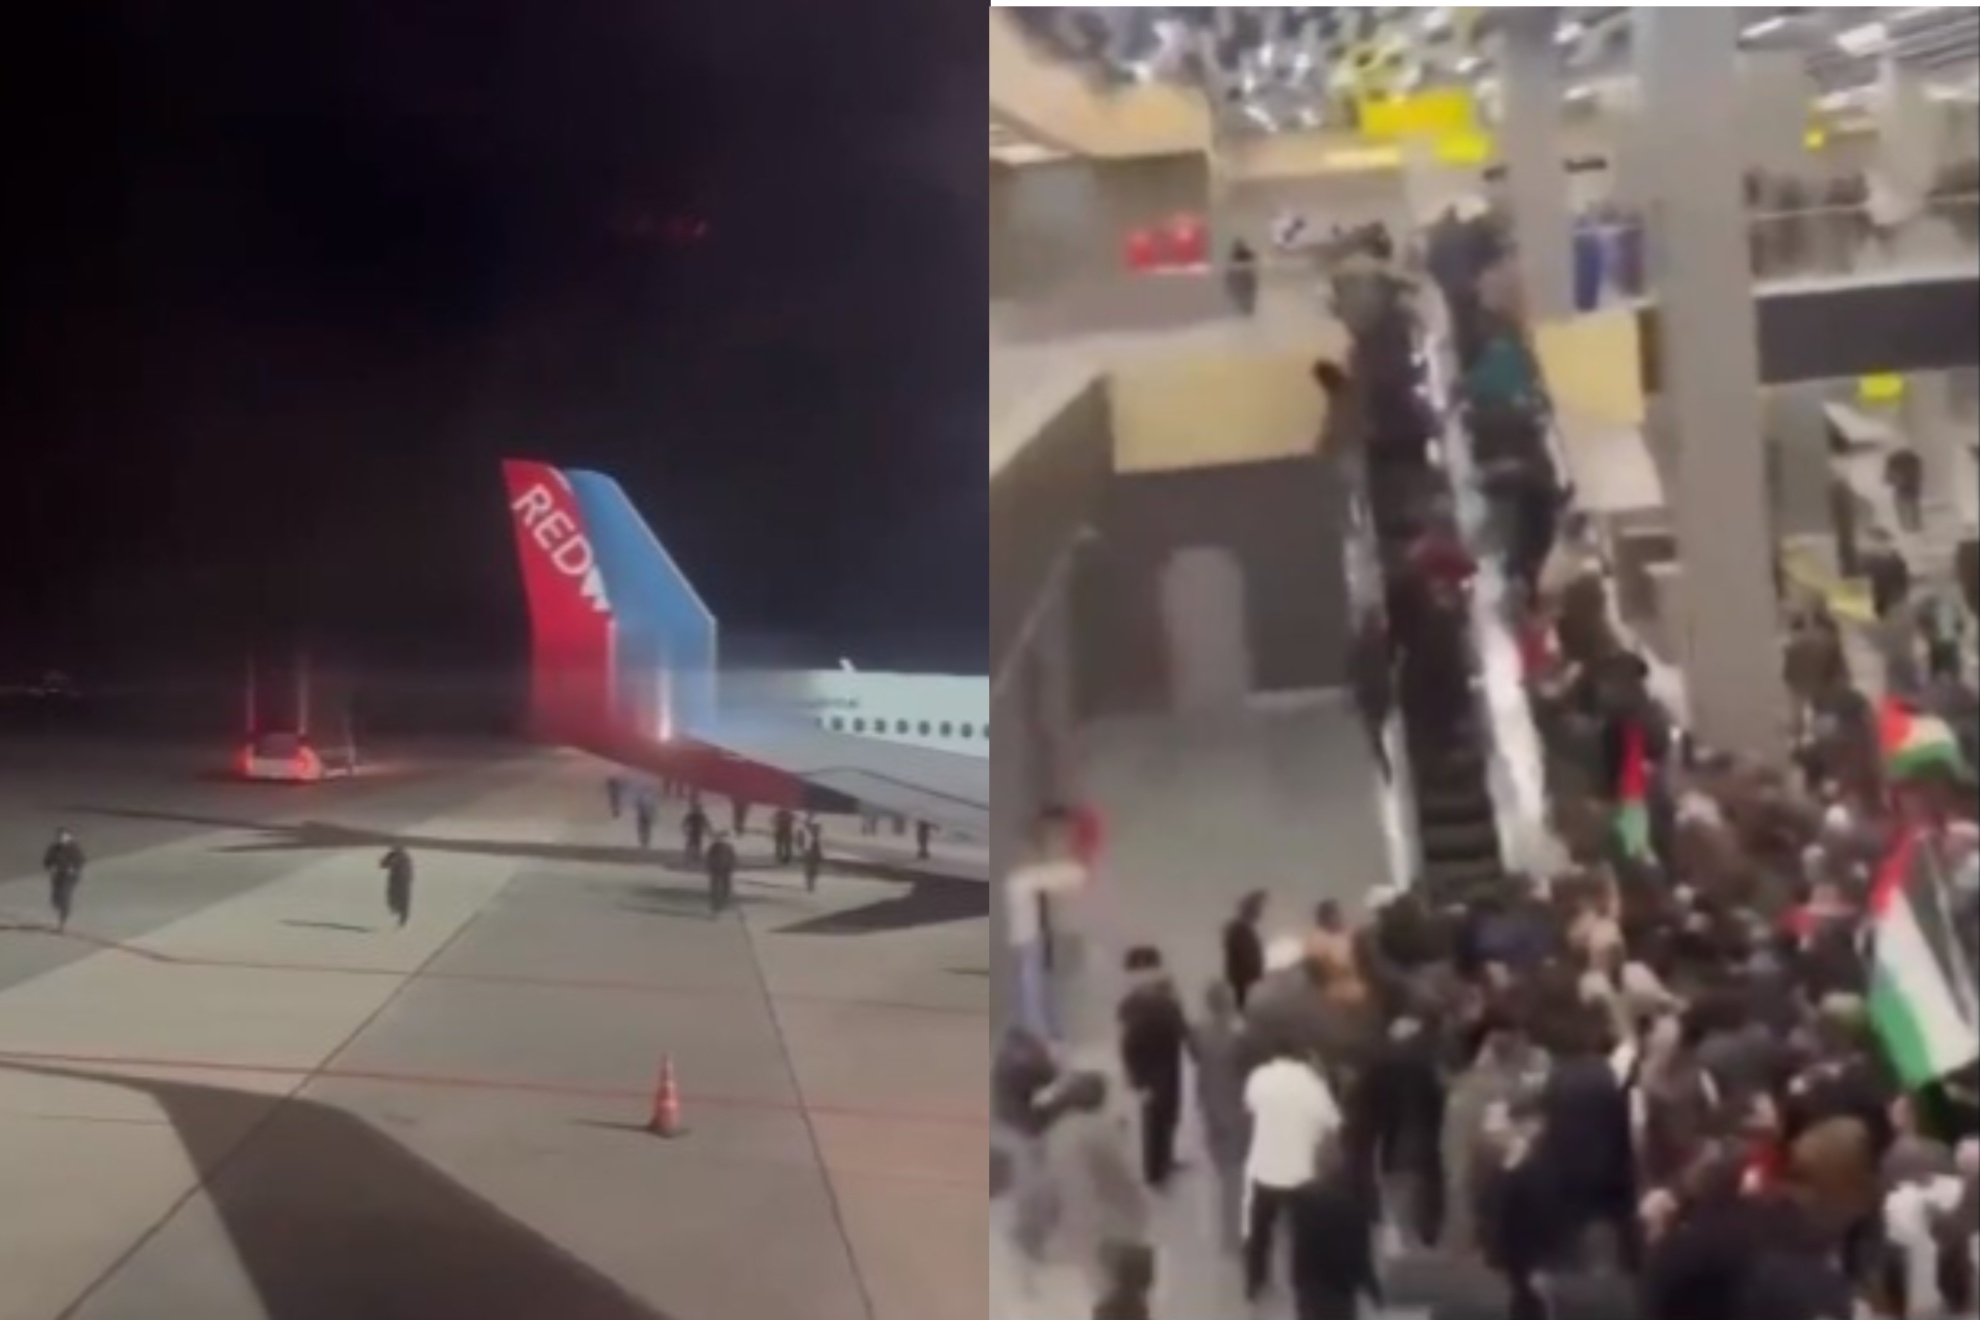 A riot erupted at Makhachkala airport in Dagestan